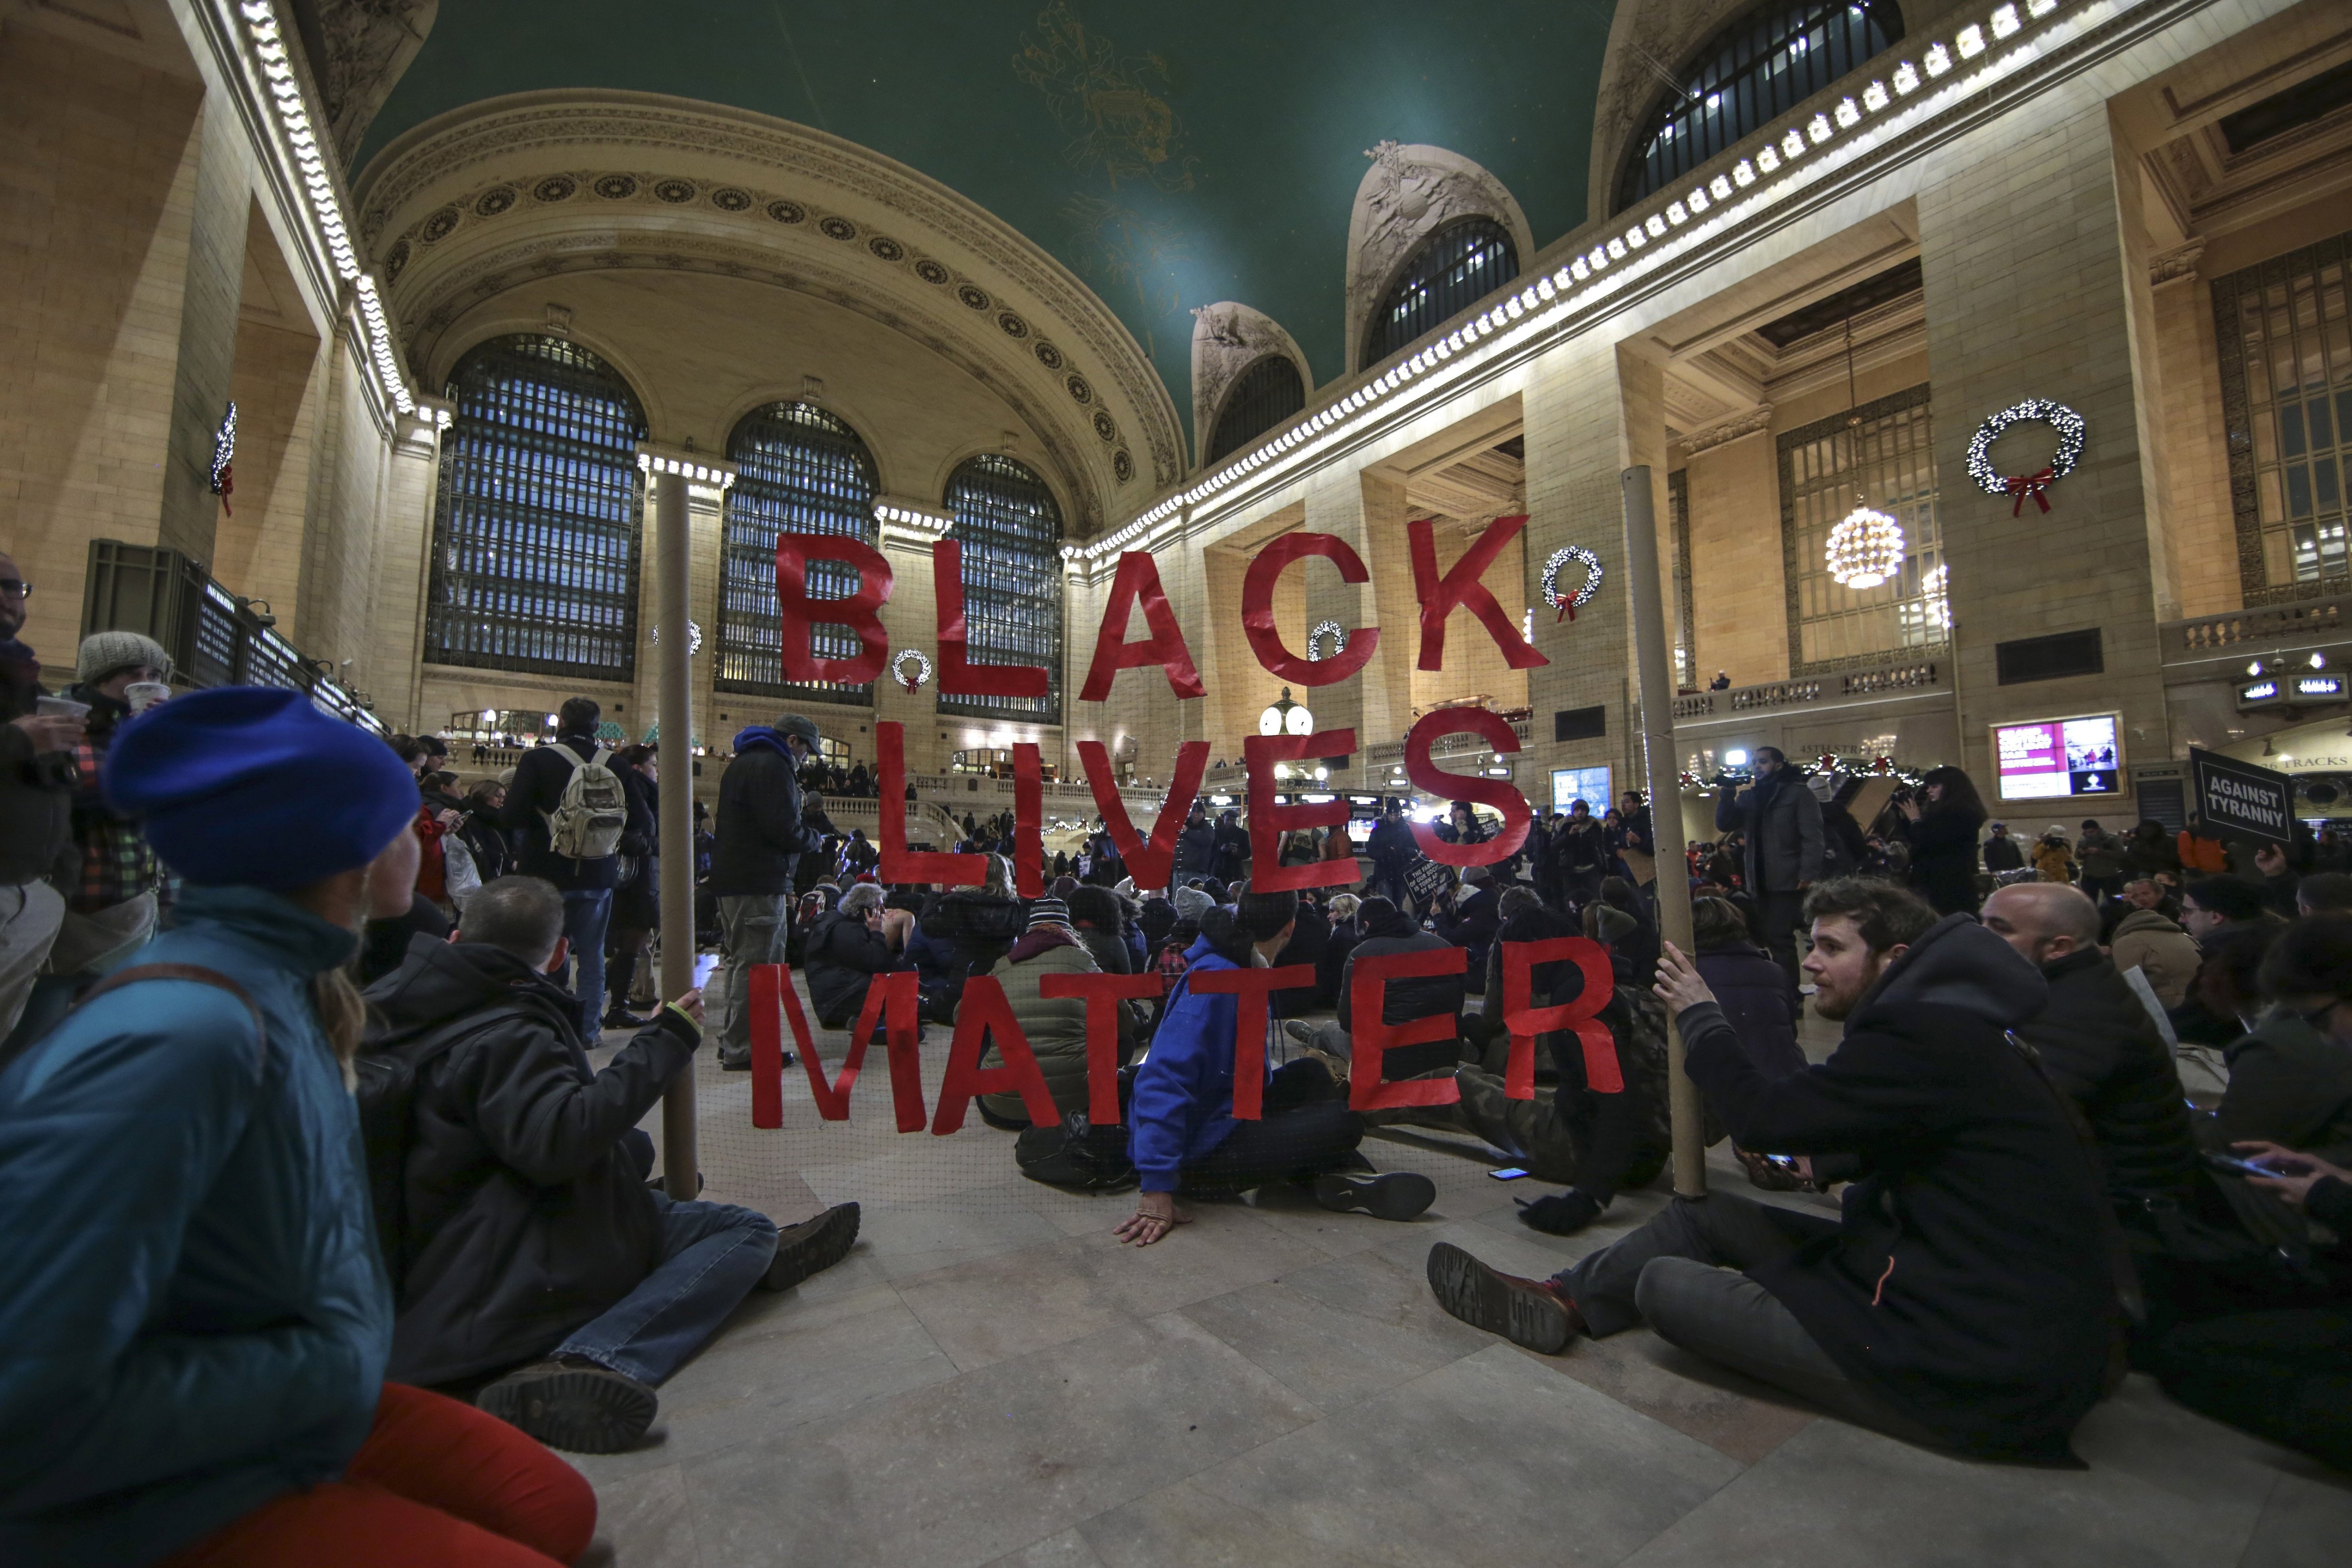 Protesters hold a banner during a protest at Grand Central Terminal after a grand jury decided not to indict a police officer involved in the death of  Eric Garner in July on December 7, 2014 in New York, N.Y. Protests are being staged nationwide after grand juries investigating the deaths of Michael Brown in Ferguson, Missouri and Eric Garner in New York failed to indict the police officers involved in both incidents. (Anadolu Agency&mdash;2014 Anadolu Agency)